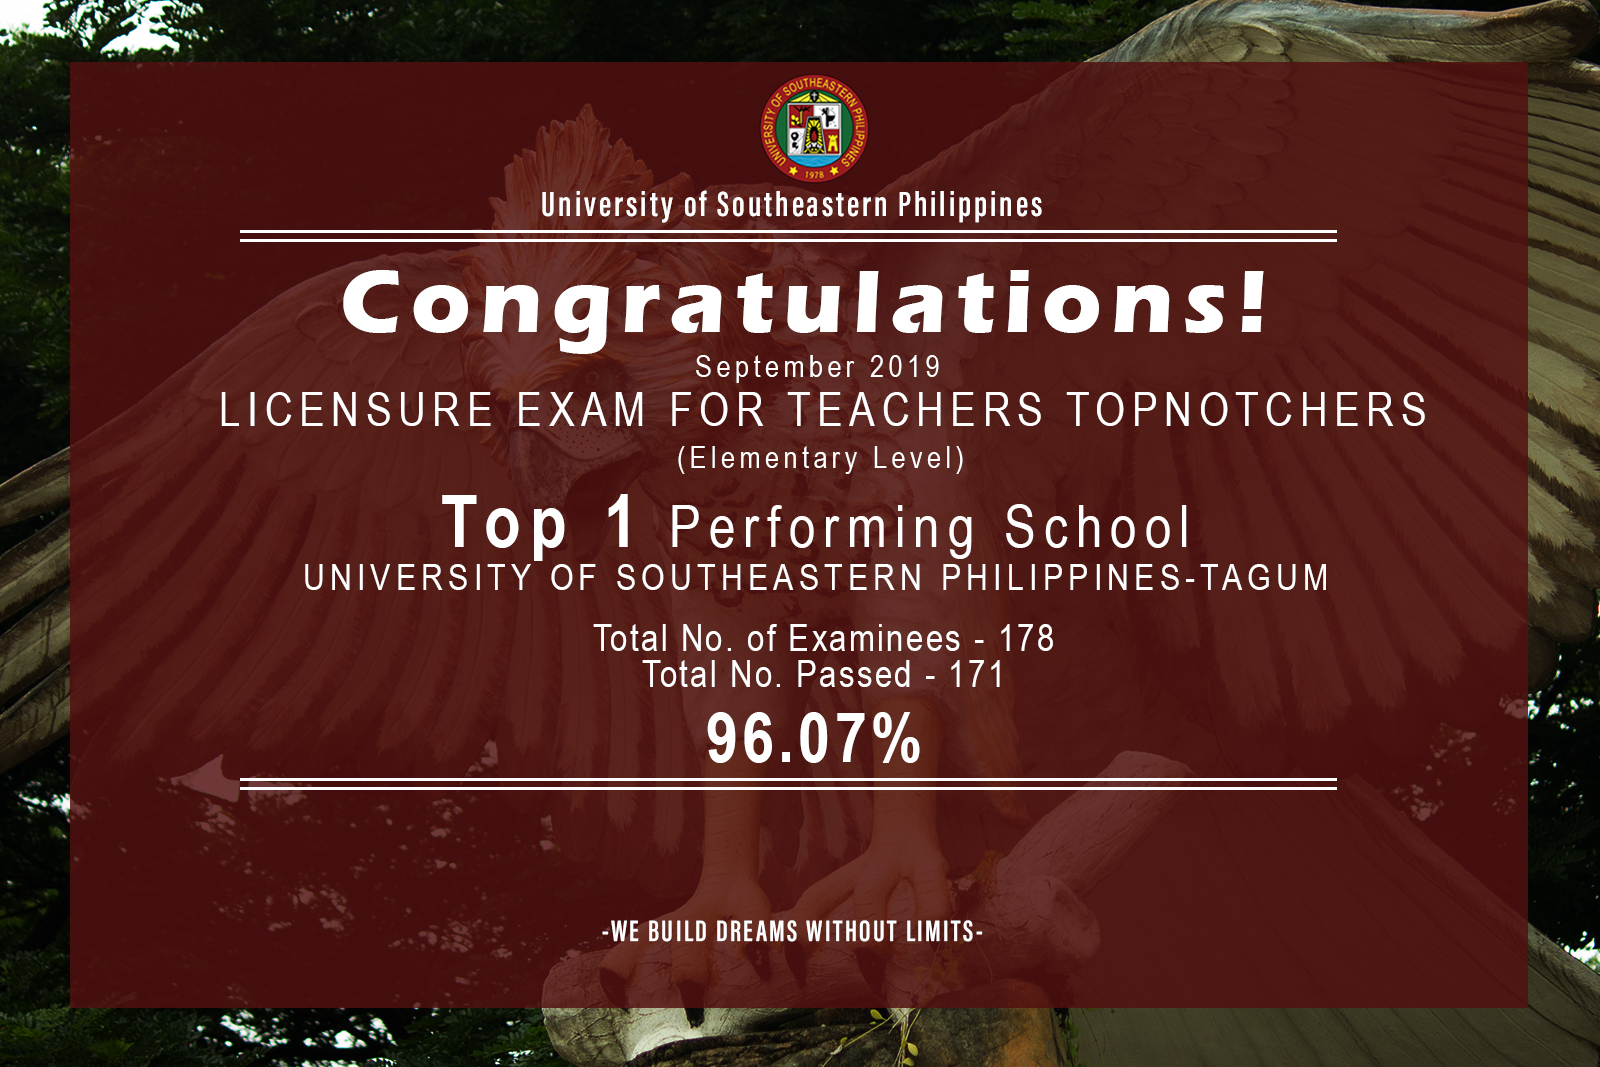 UNIVERSITY OF SOUTHEASTERN PHILIPPINES’ PERFORMANCE IN THE SEPTEMBER 2019 LICENSURE EXAMINATIONS FOR TEACHERS